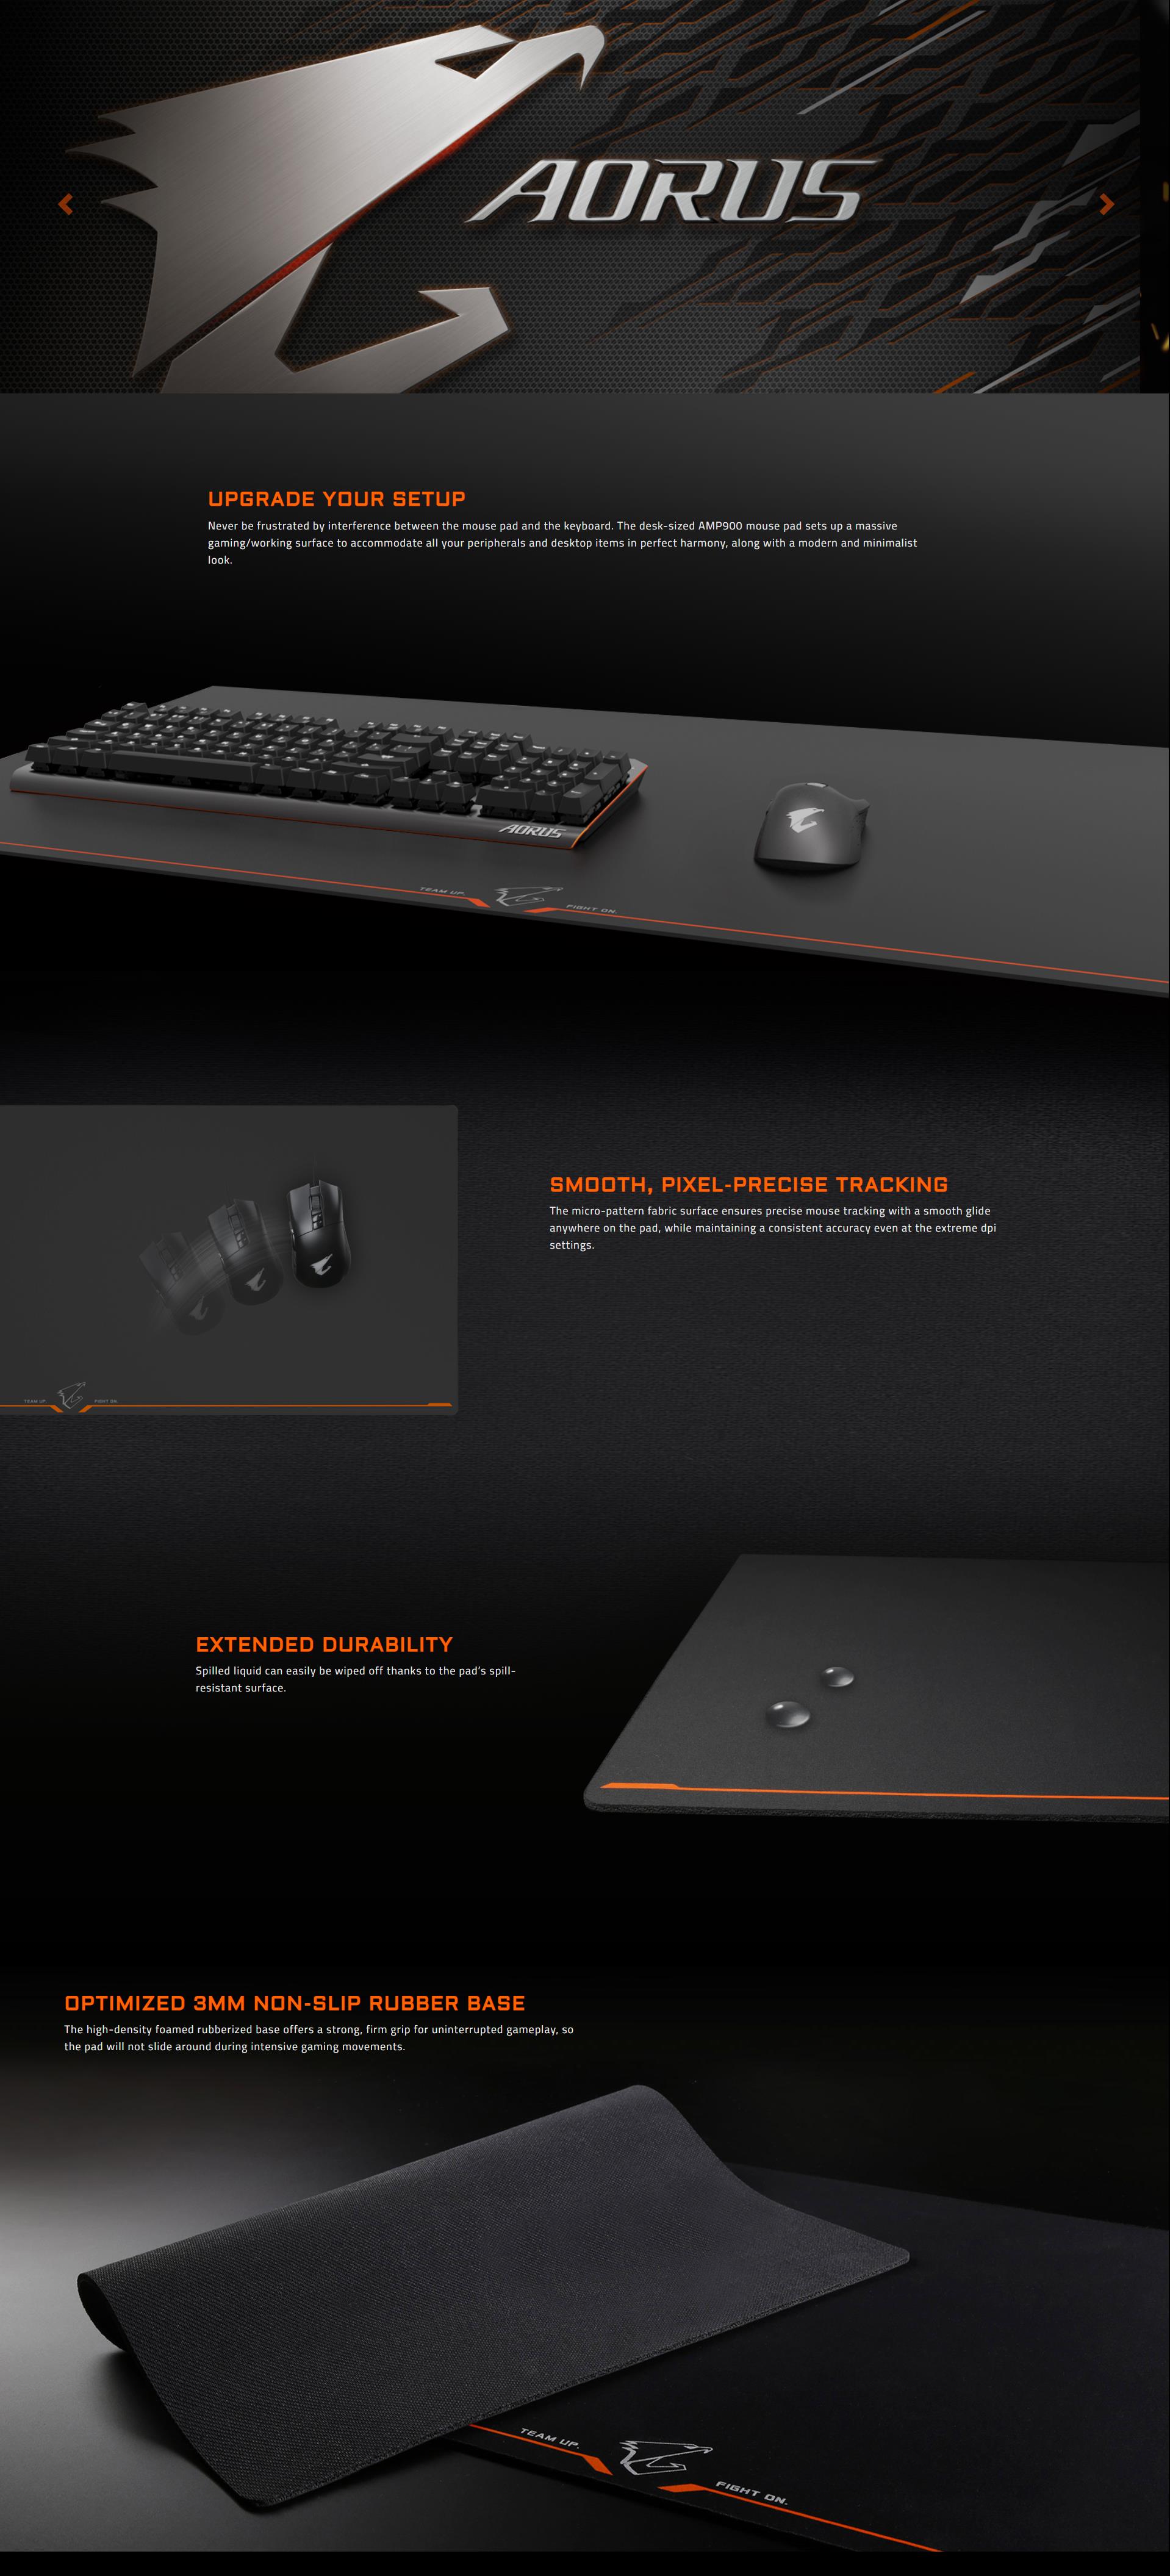 A large marketing image providing additional information about the product Gigabyte AMP900 Gaming Mousemat - Additional alt info not provided